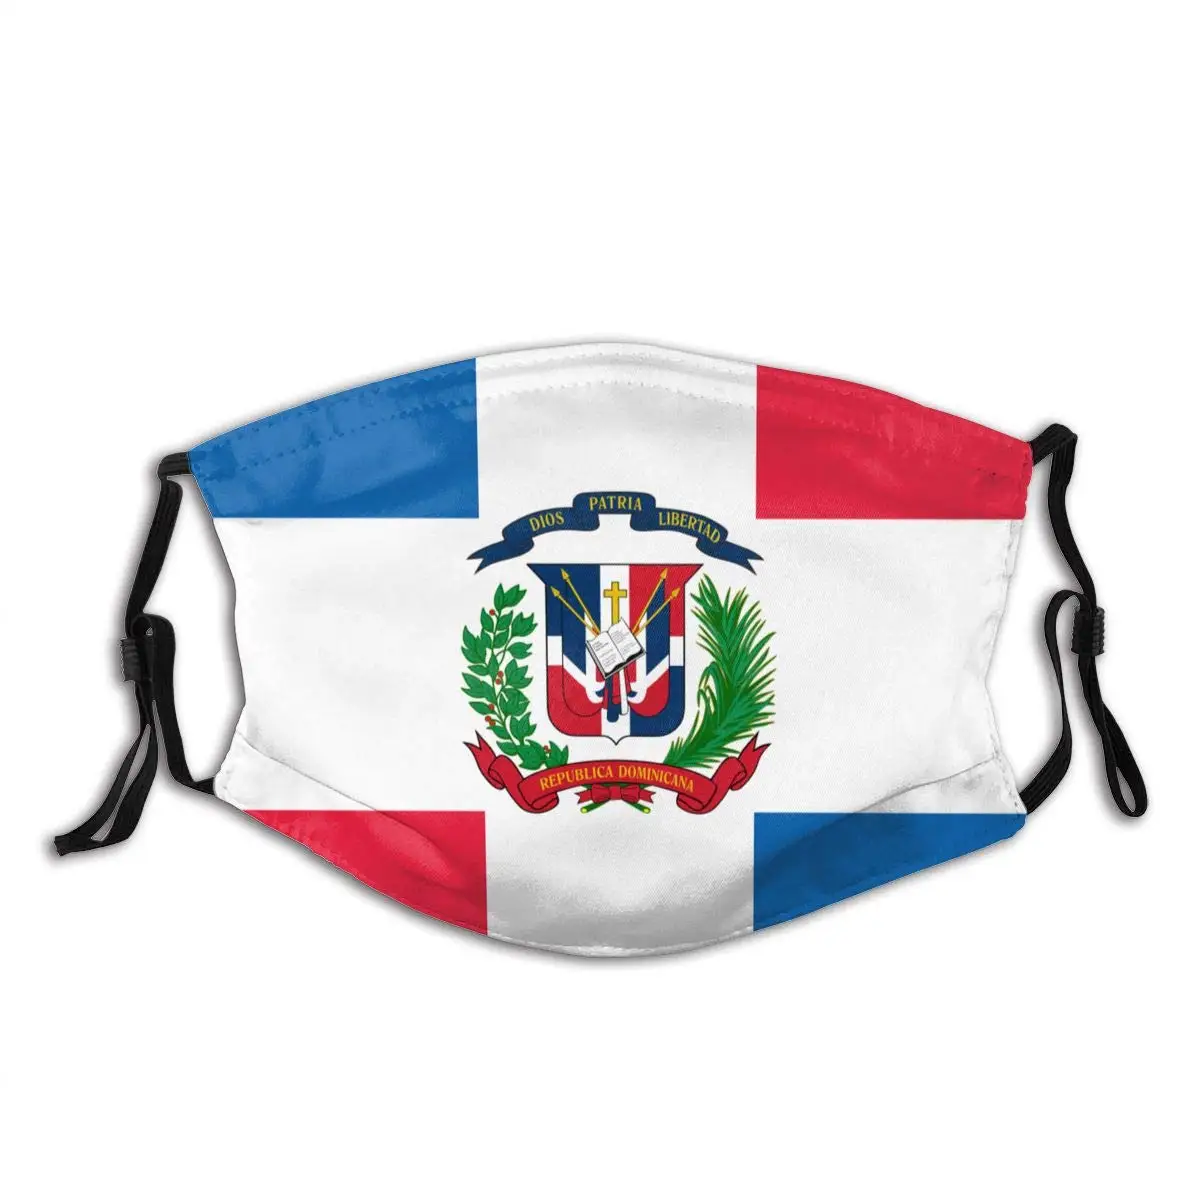 

New Dominican Republic Flag Pm2.5 Face Bandanas Dust Scarf,M-Shaped Nose Clip,Equipped With Two Replaceable Activated Carbon